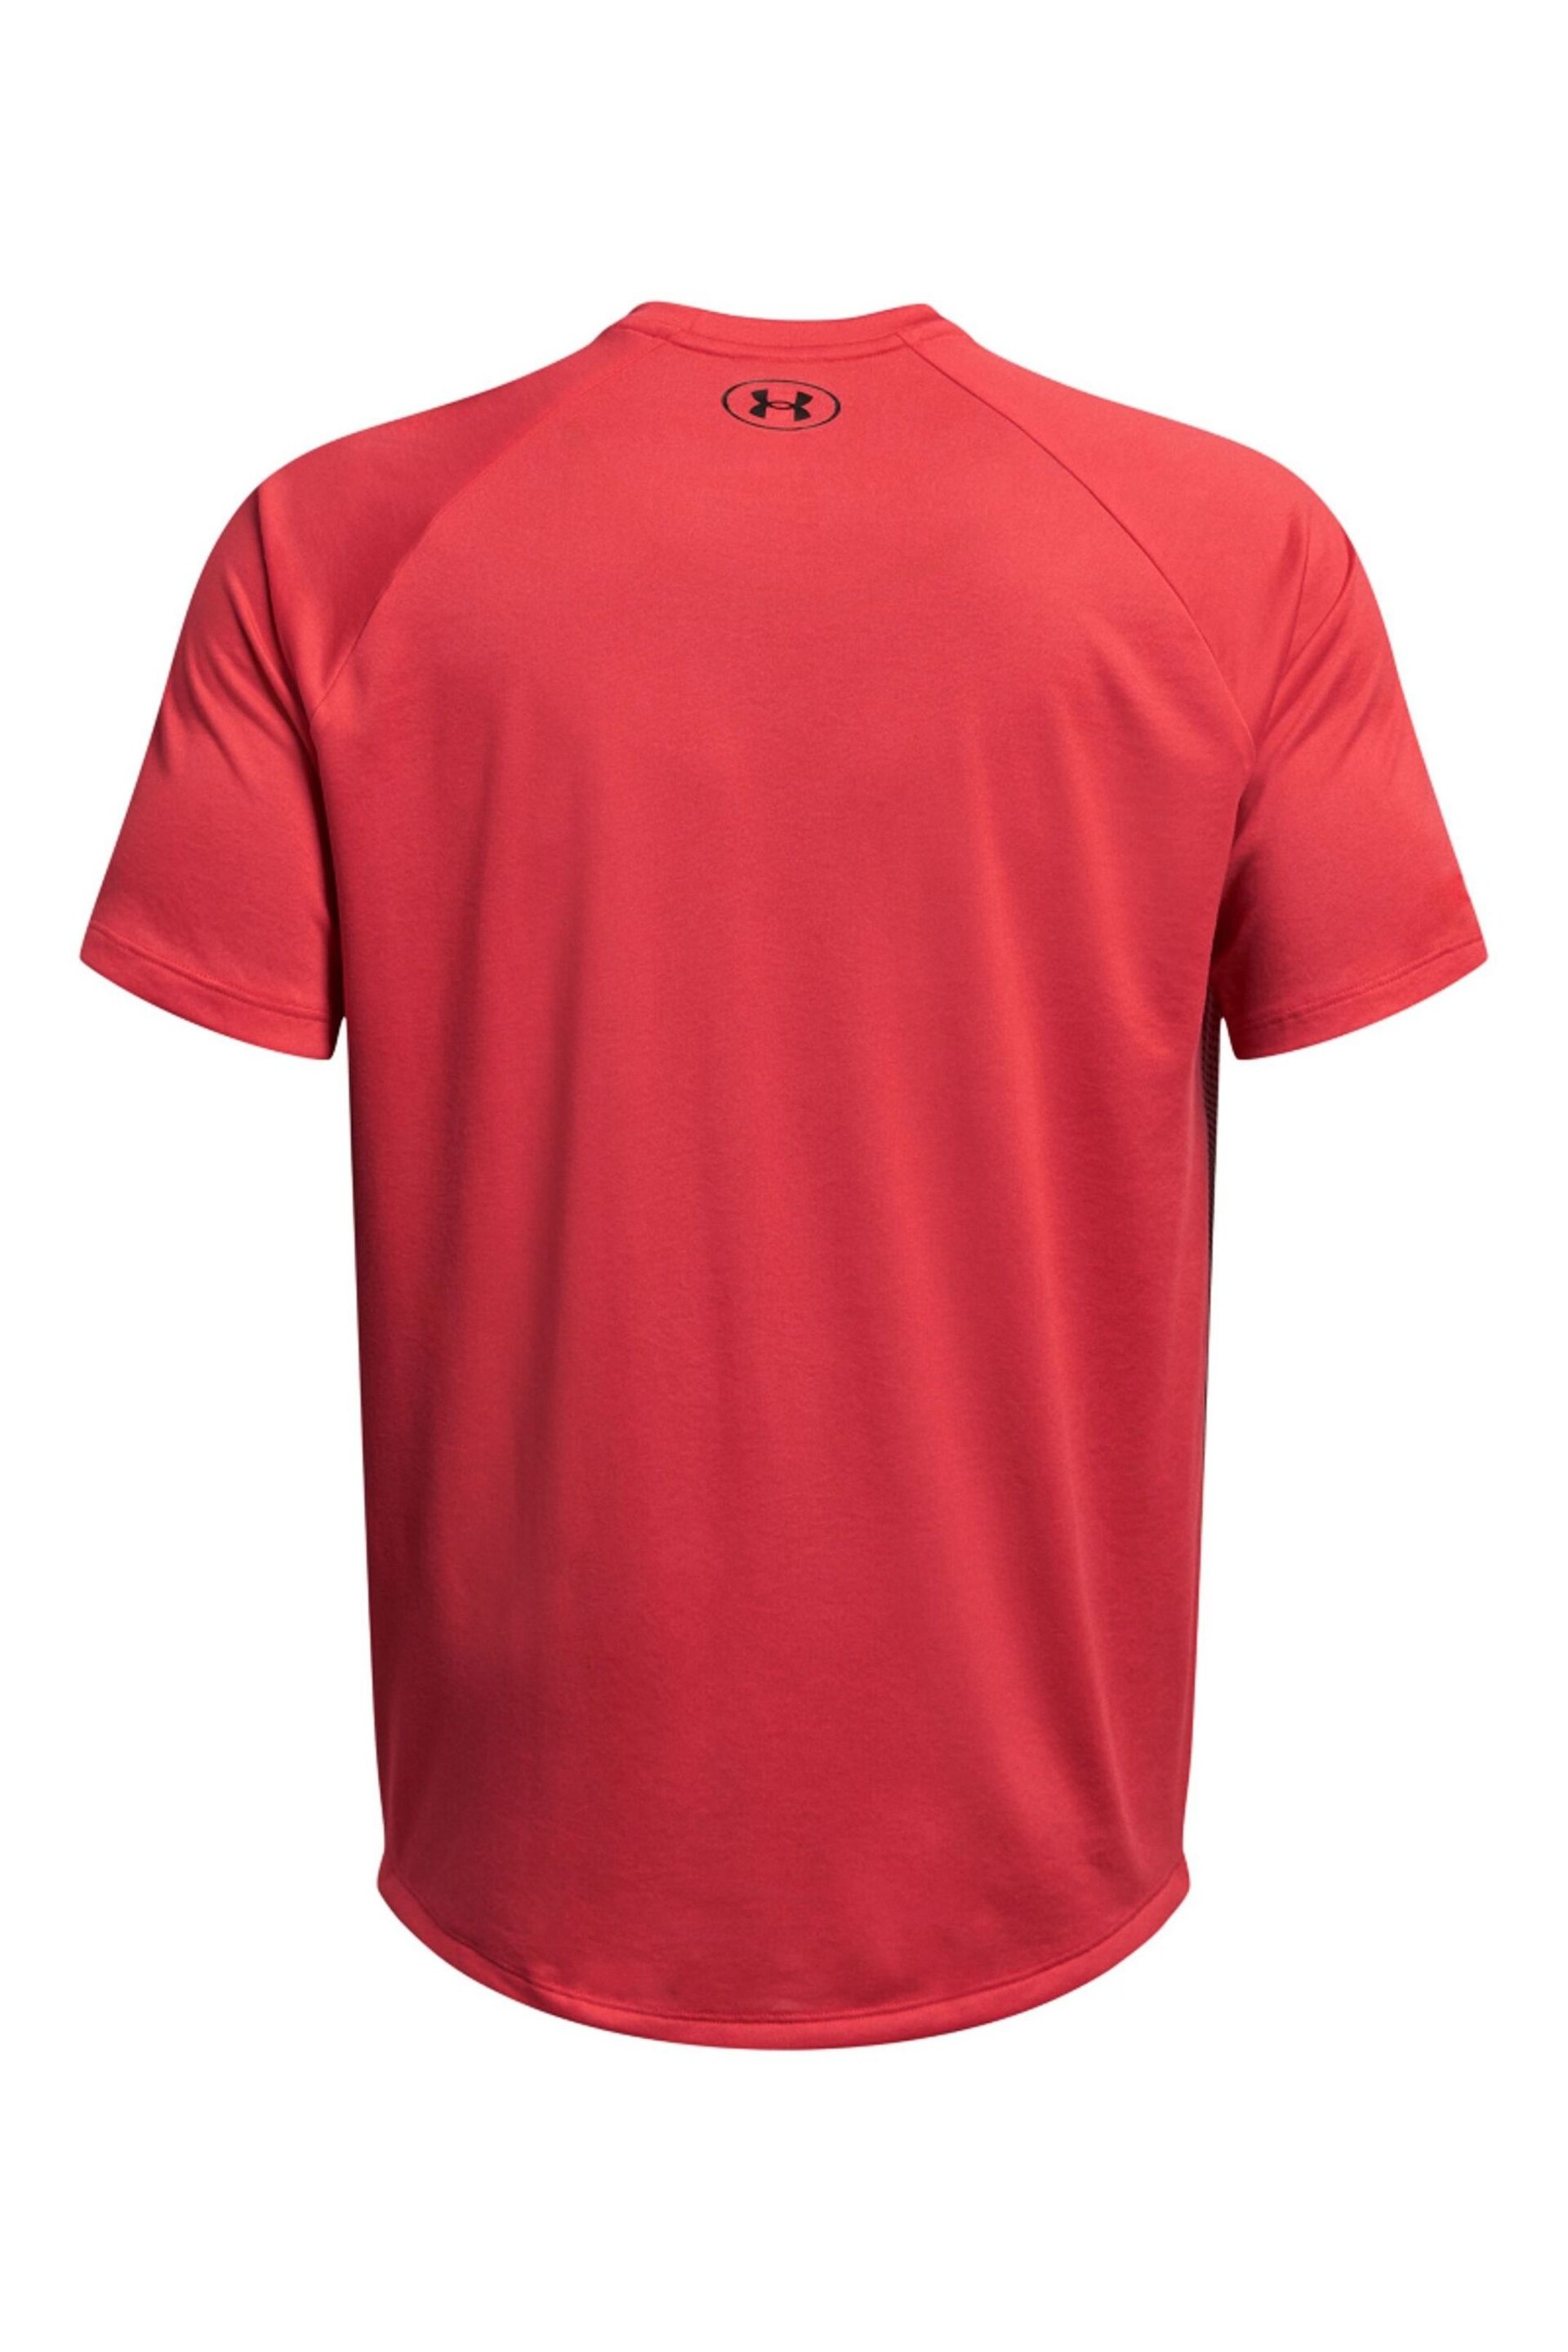 Under Armour Red Tech Fade Short Sleeve T-Shirt - Image 4 of 4